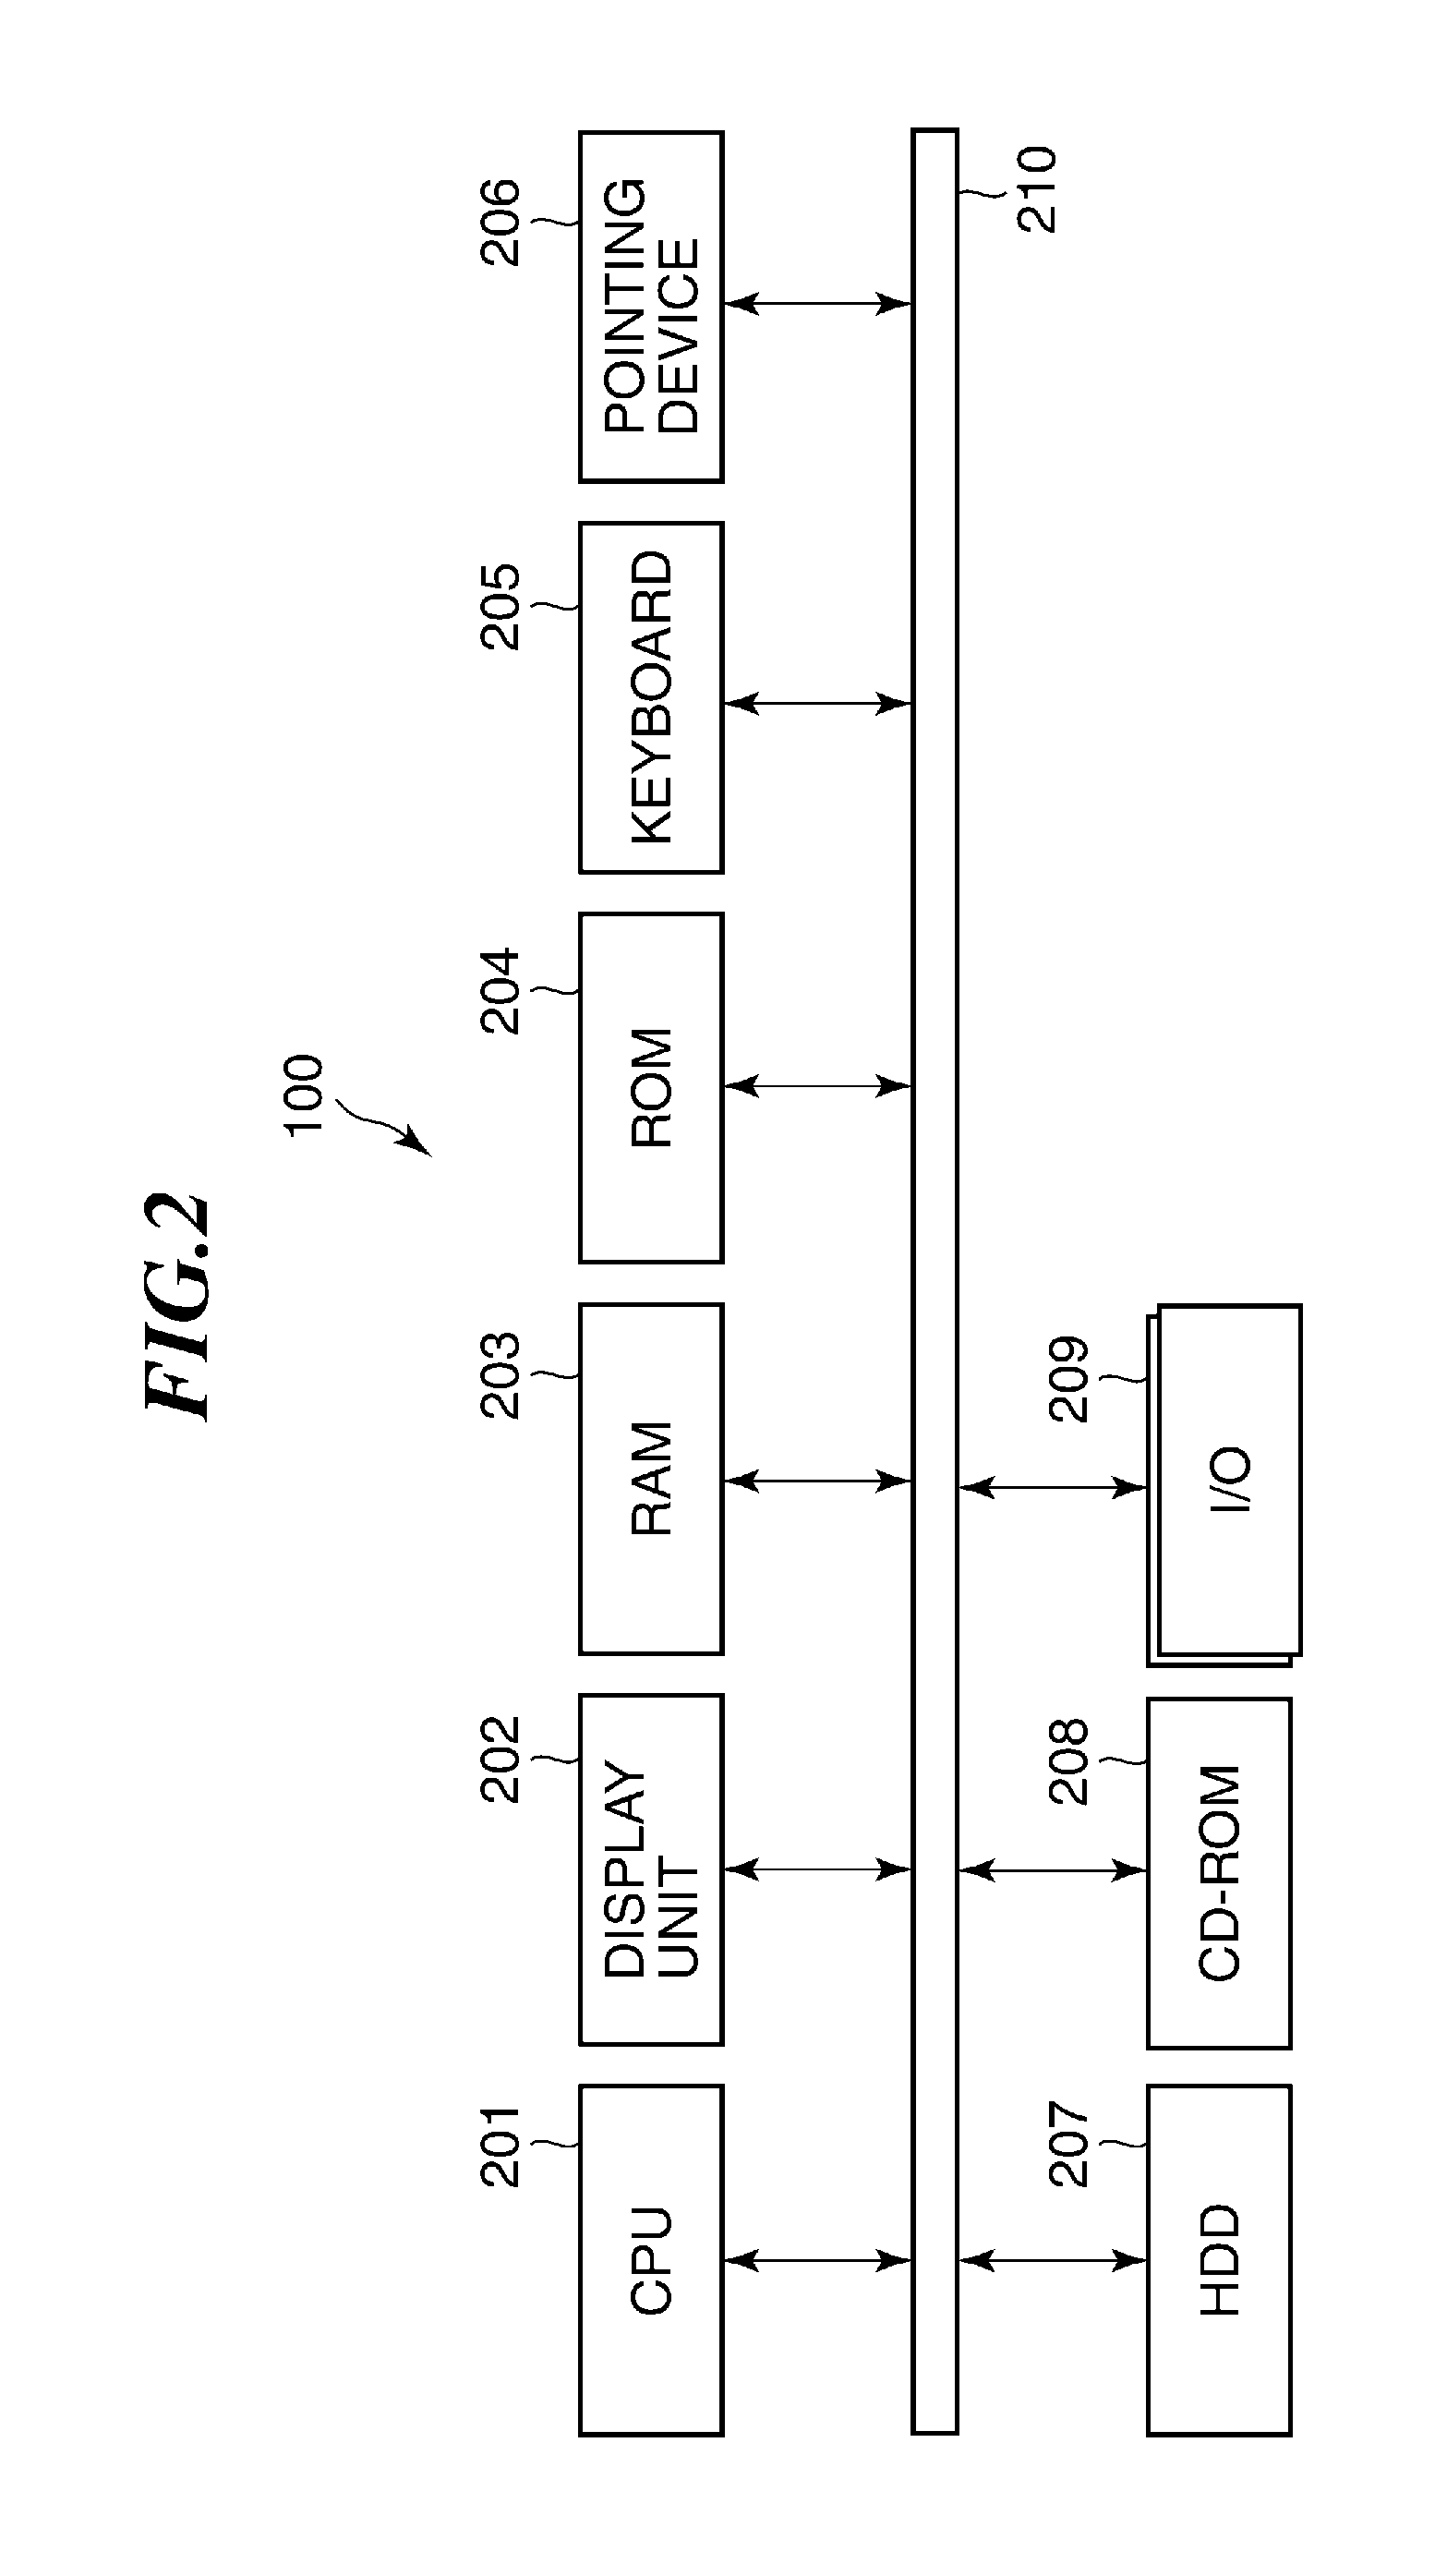 Information processing apparatus capable of setting configuration information for use by image processing apparatus, and control method and storage medium therefor